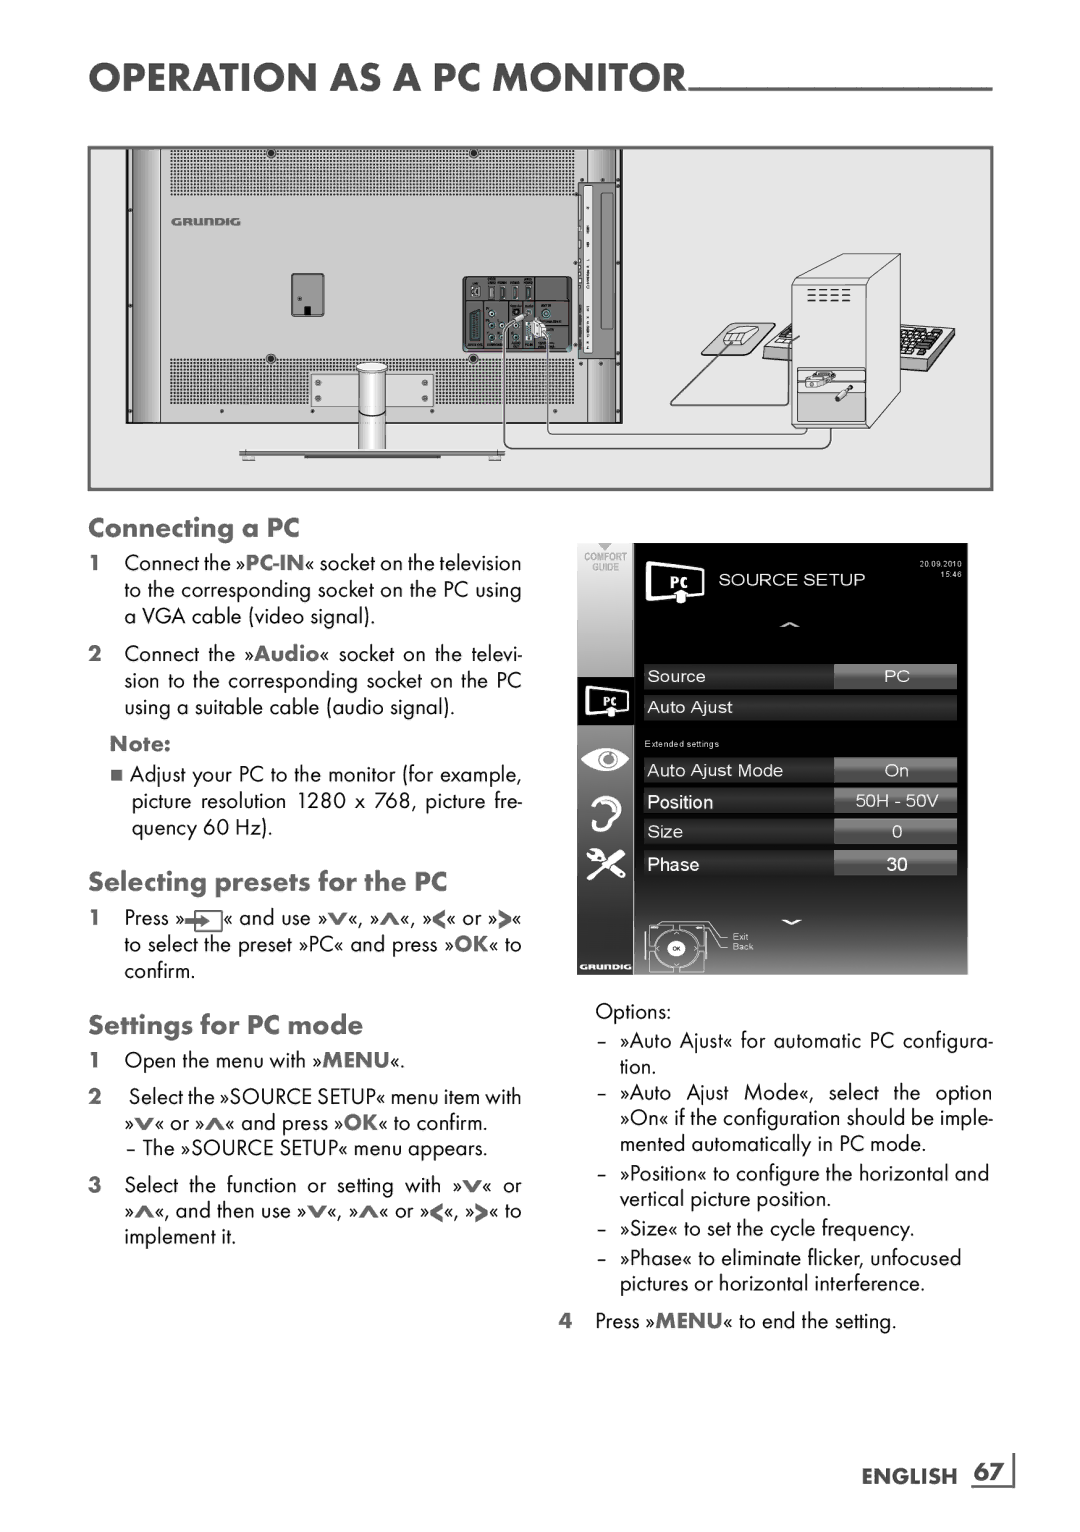 Grundig 55 CLE 9170 SL manual Connecting a PC, Selecting presets for the PC, Settings for PC mode, English ­67 